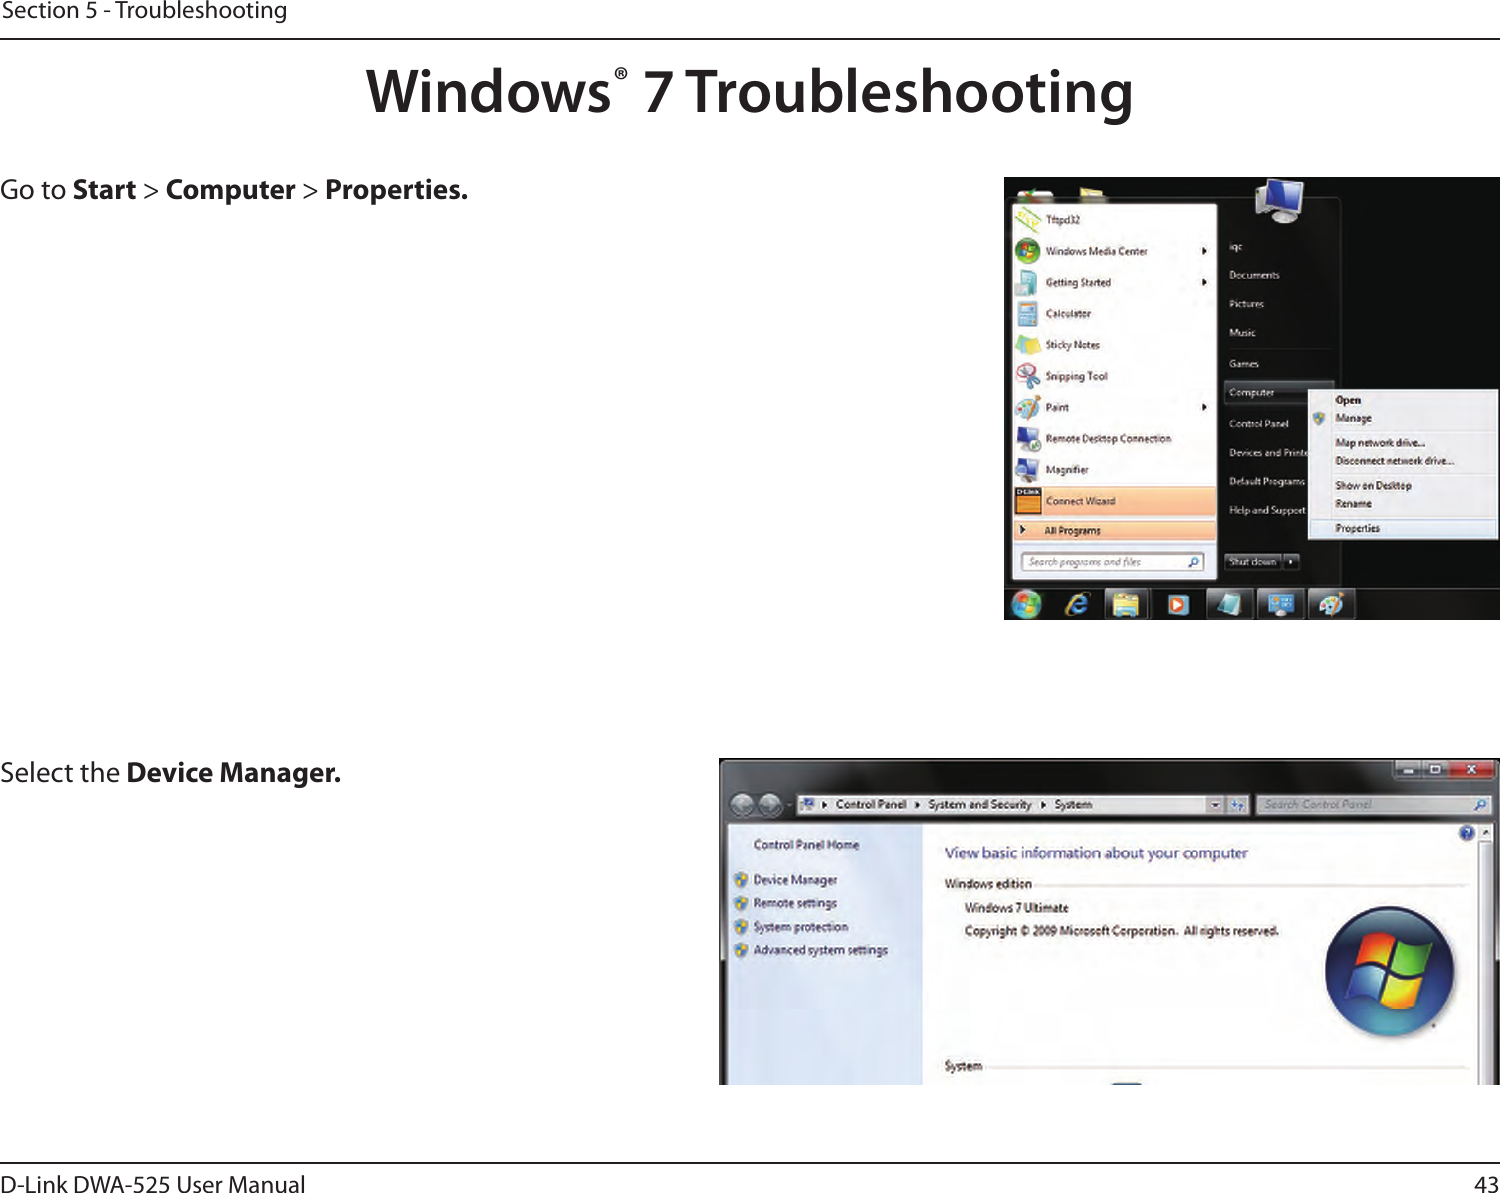 43D-Link DWA-525 User ManualSection 5 - TroubleshootingWindows® 7 TroubleshootingGo to Start &gt; Computer &gt; Properties.Select the Device Manager.